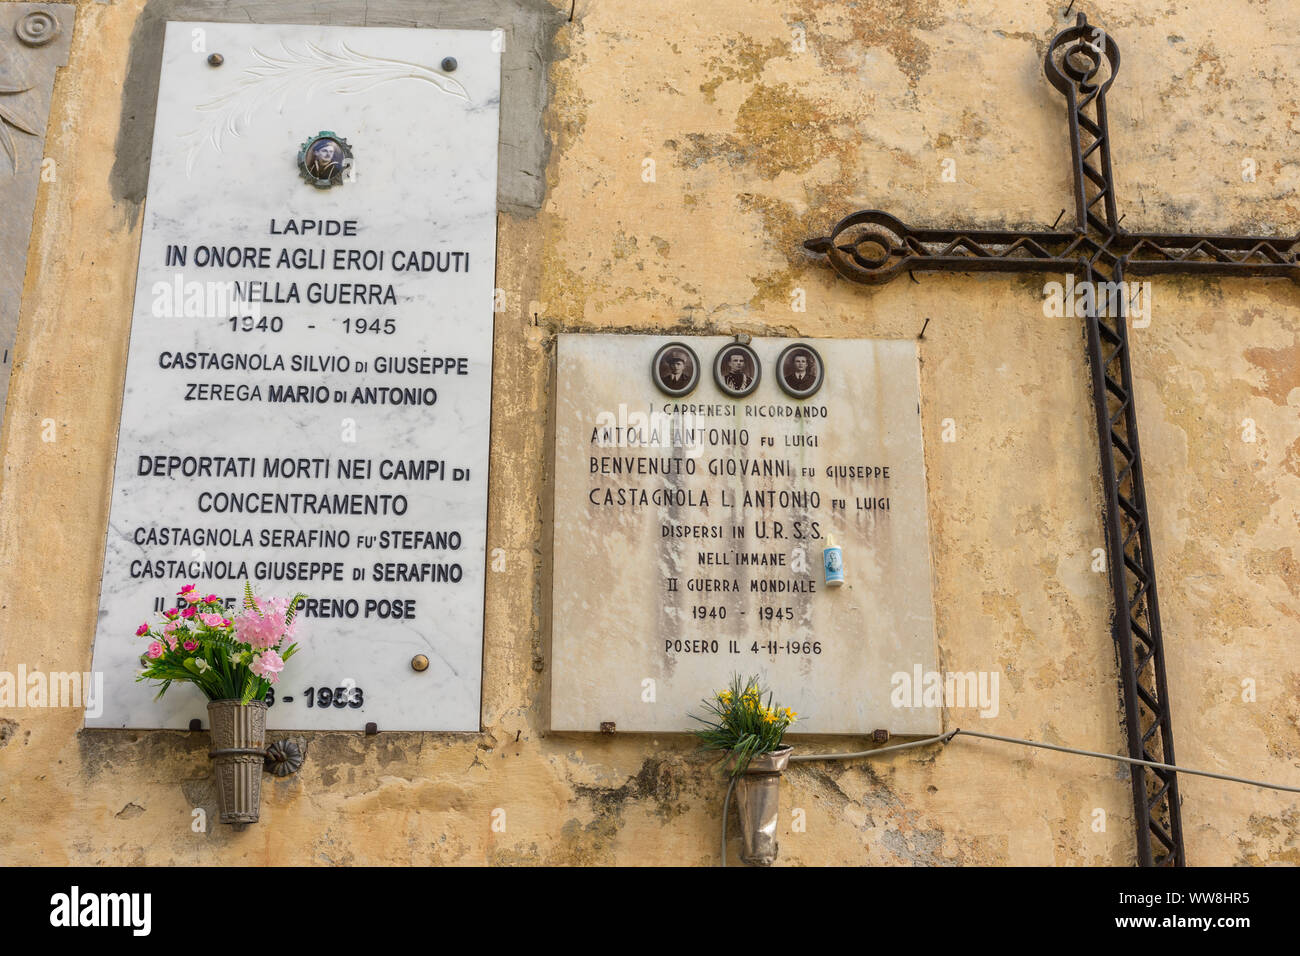 Wall graves for soldiers fallen during World War 2 on the wall of the Church Parrocchiale di San Pietro in Capreno, Liguria, Italy Stock Photo